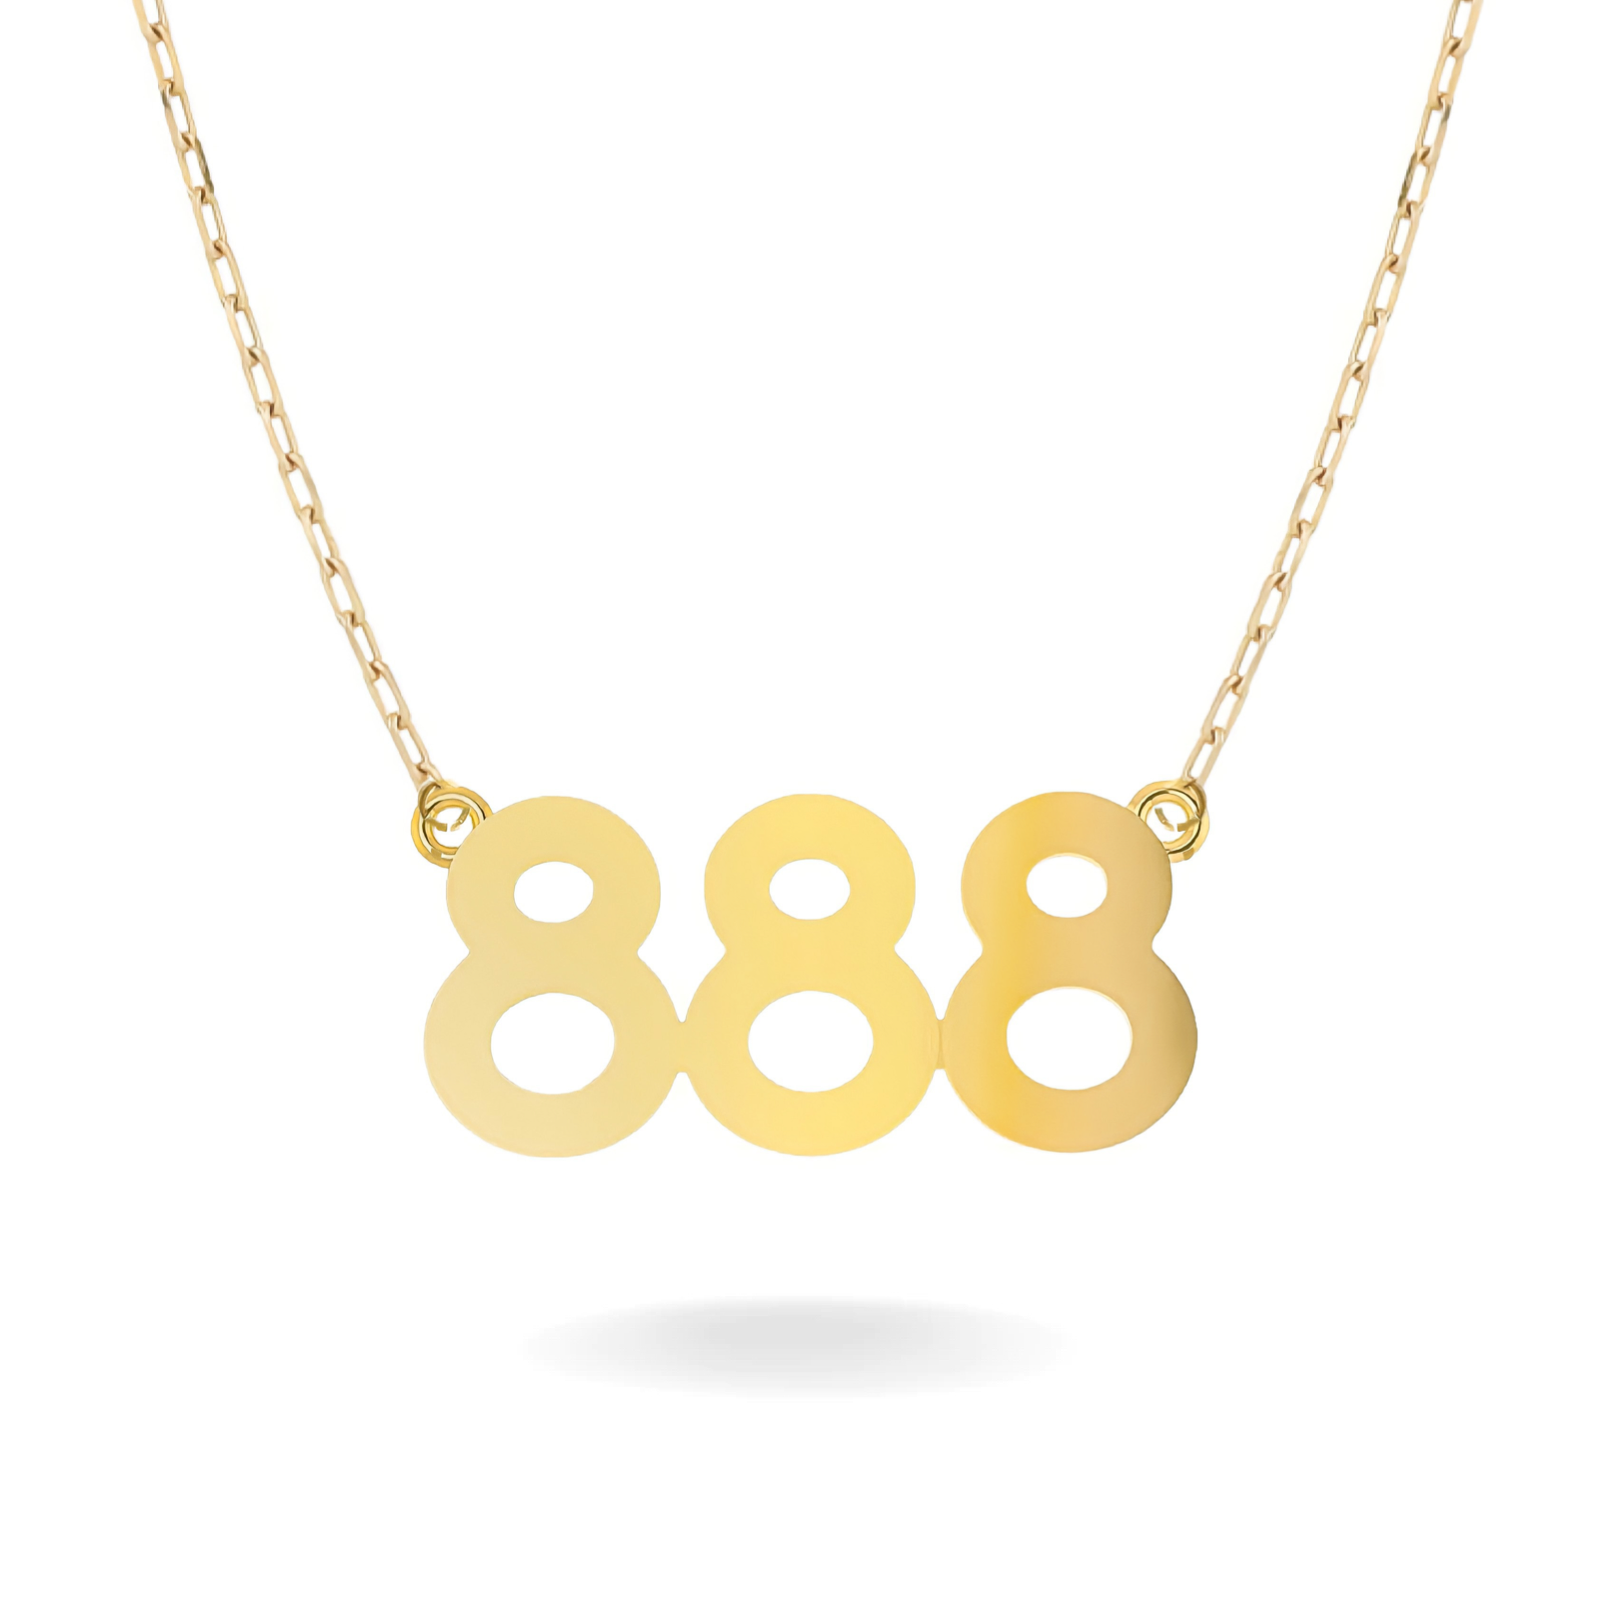 14K YELLOW GOLD ANGEL NUMBERS NECKLACE